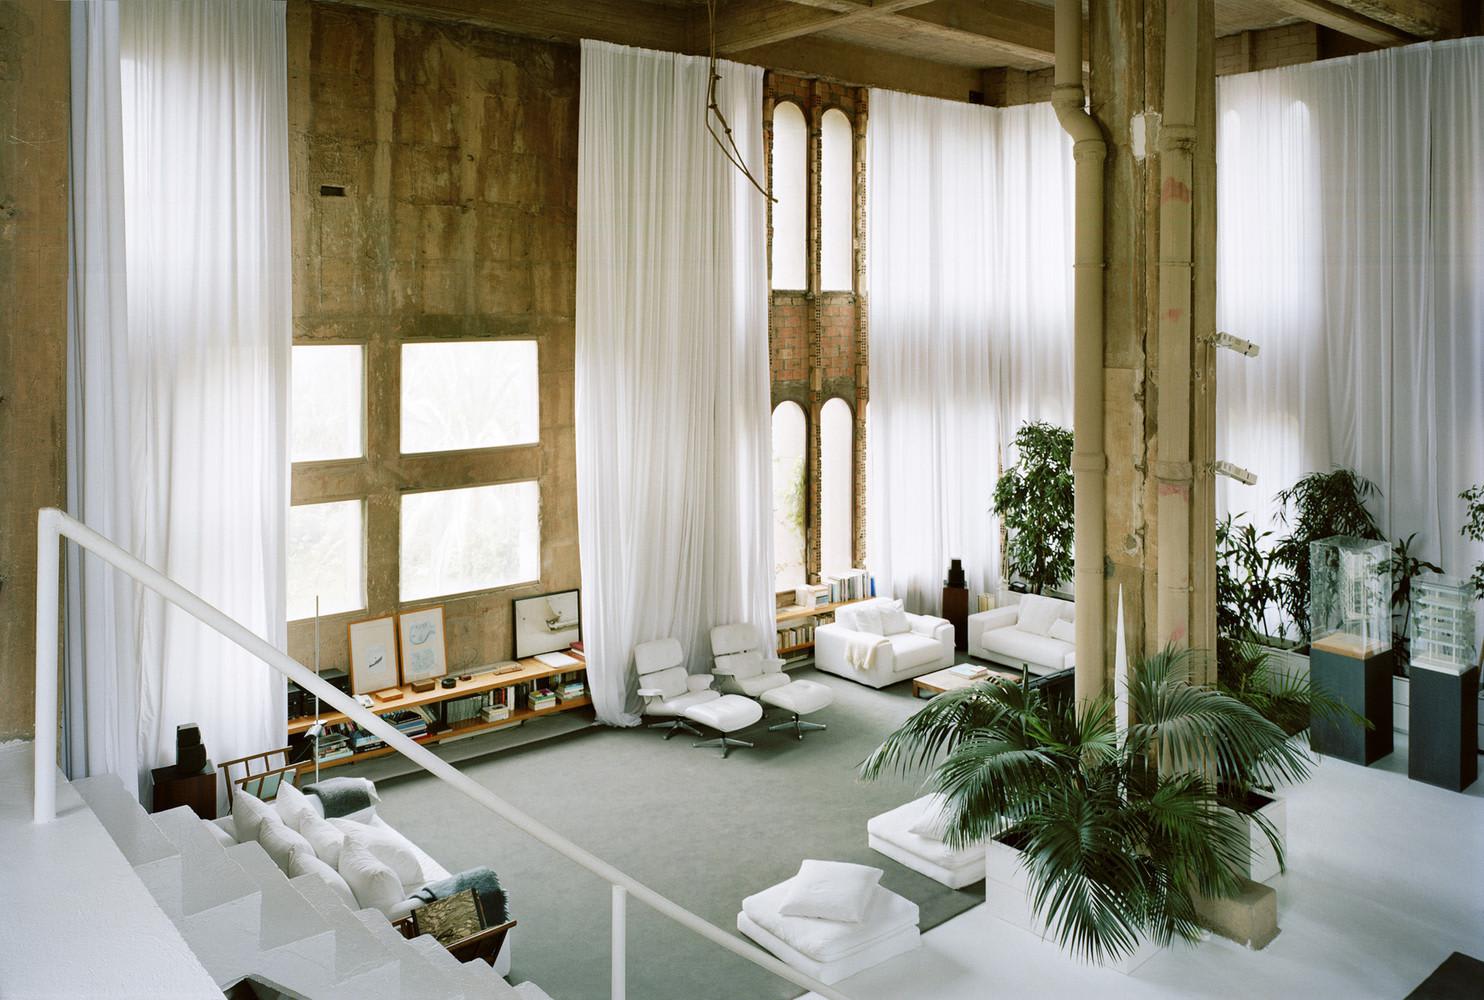 An Architect's Home in an abandoned concrete factory | "La Fábrica" - Ricardo Bofill | BCN, Spain. (X-Post r/RoomPorn | Gallery in Comments)